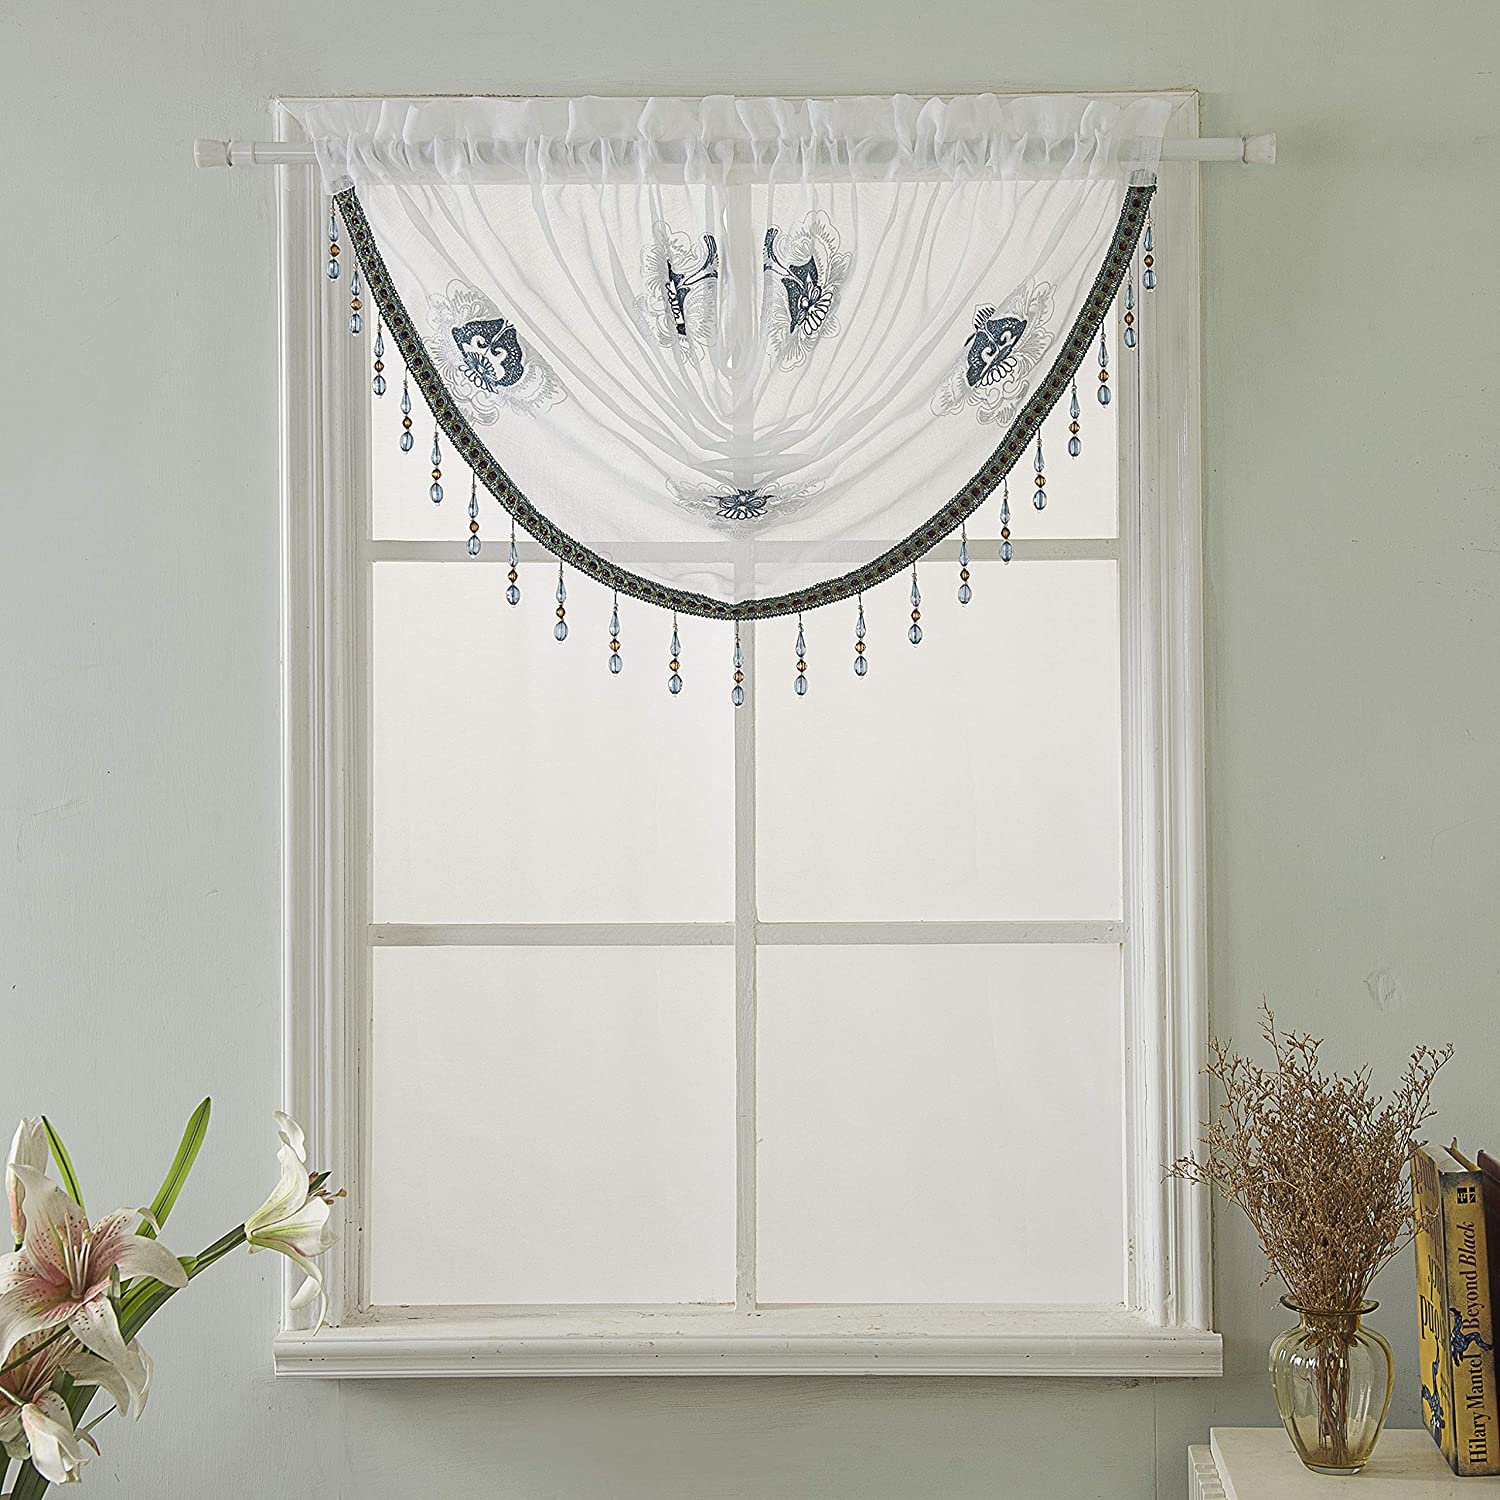 Oslo Embroidered 47 x 37 in. Swag Window Valance - Linen Universe Co.